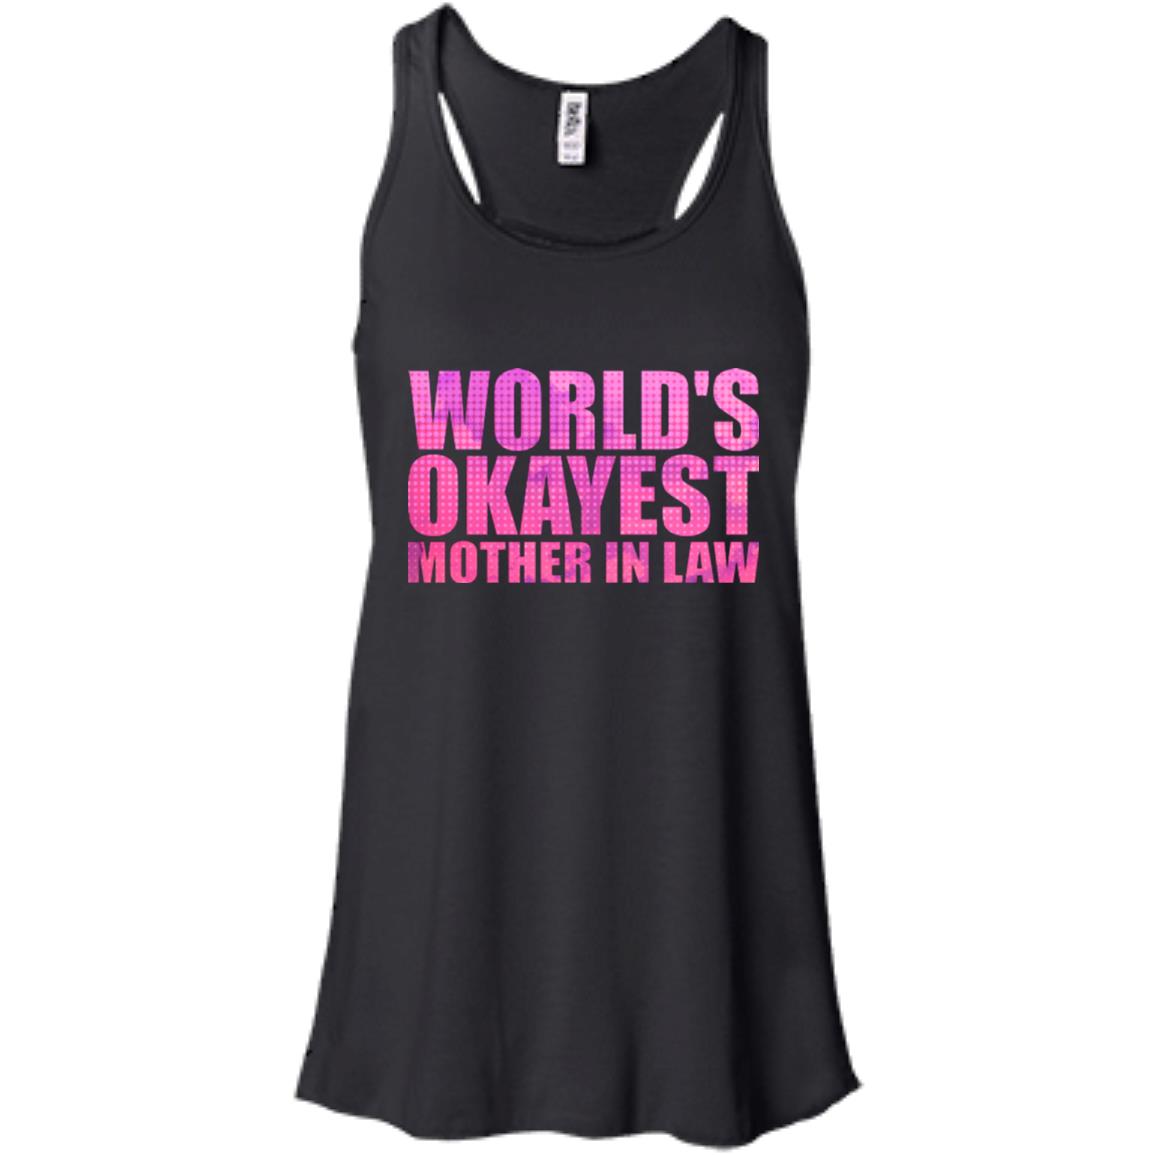 Funny shirt for mother in law Women tees n tanks - GoneBold.gift